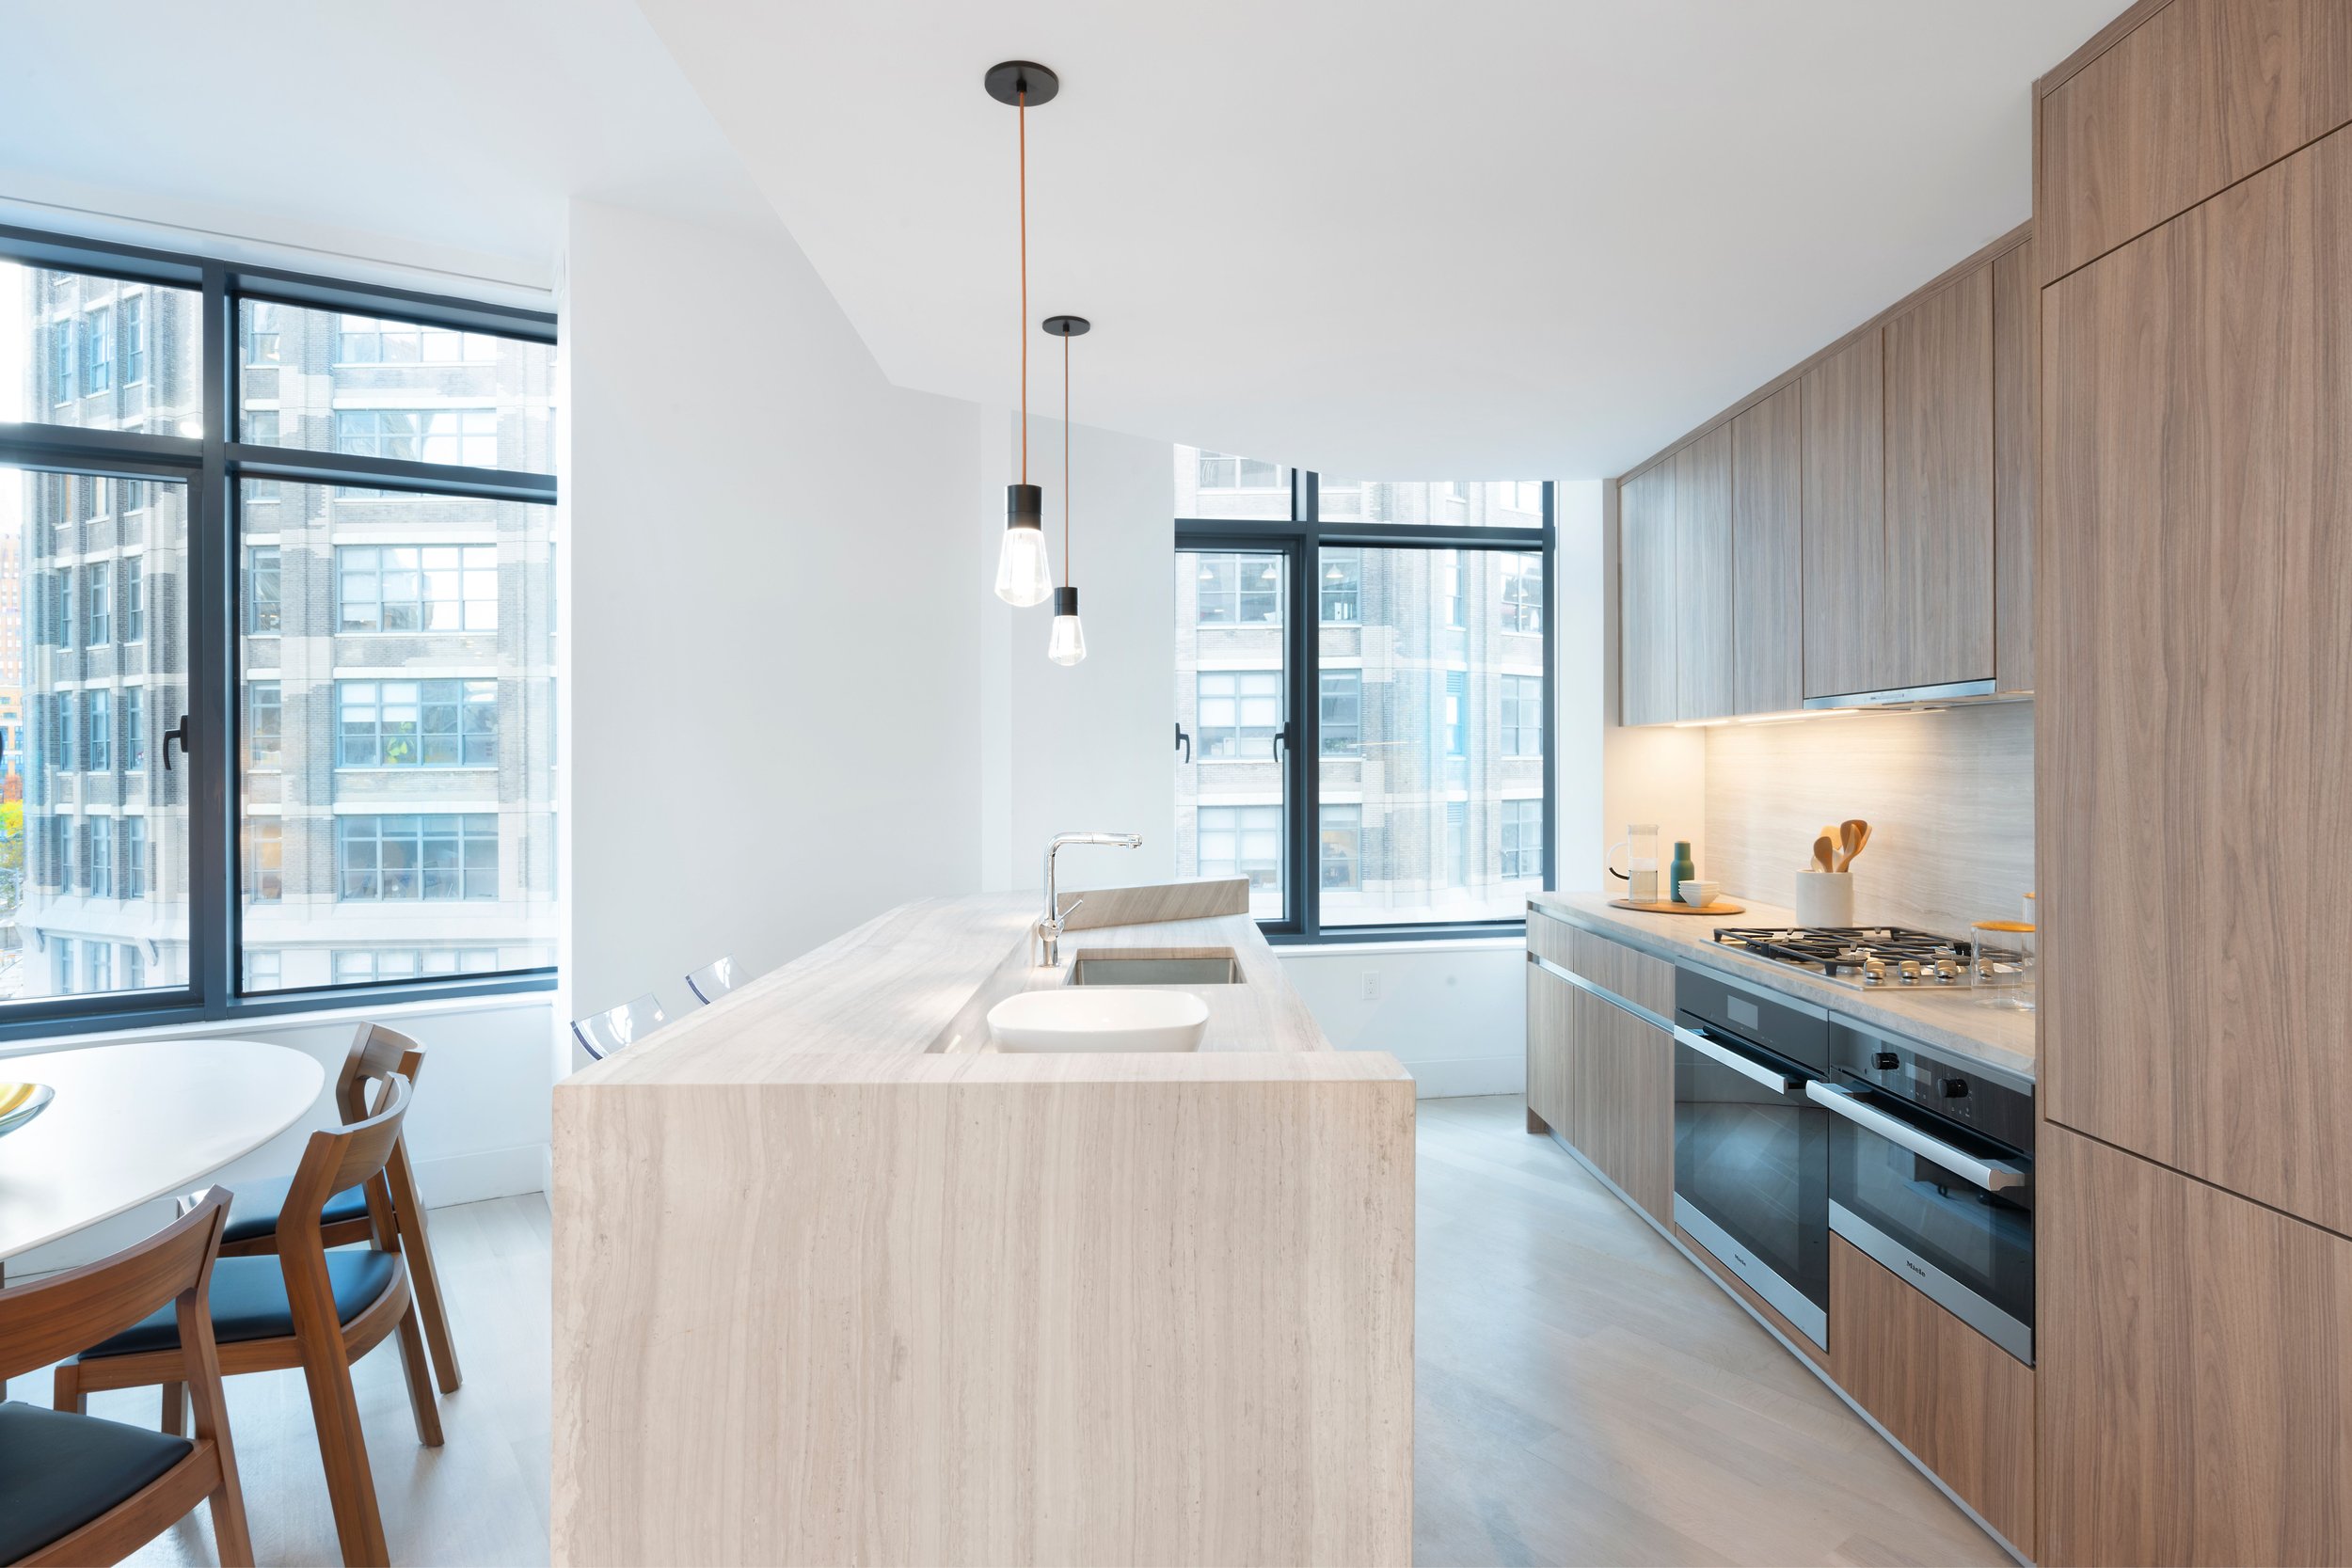  All residences have hardwood floors and ceiling heights up to 11 feet. Finishes in the kitchen include honed marble countertop and backsplash with custom kitchen cabinetry in Smoked Oak finish and built-in Miele appliances. In the primary bathroom, 